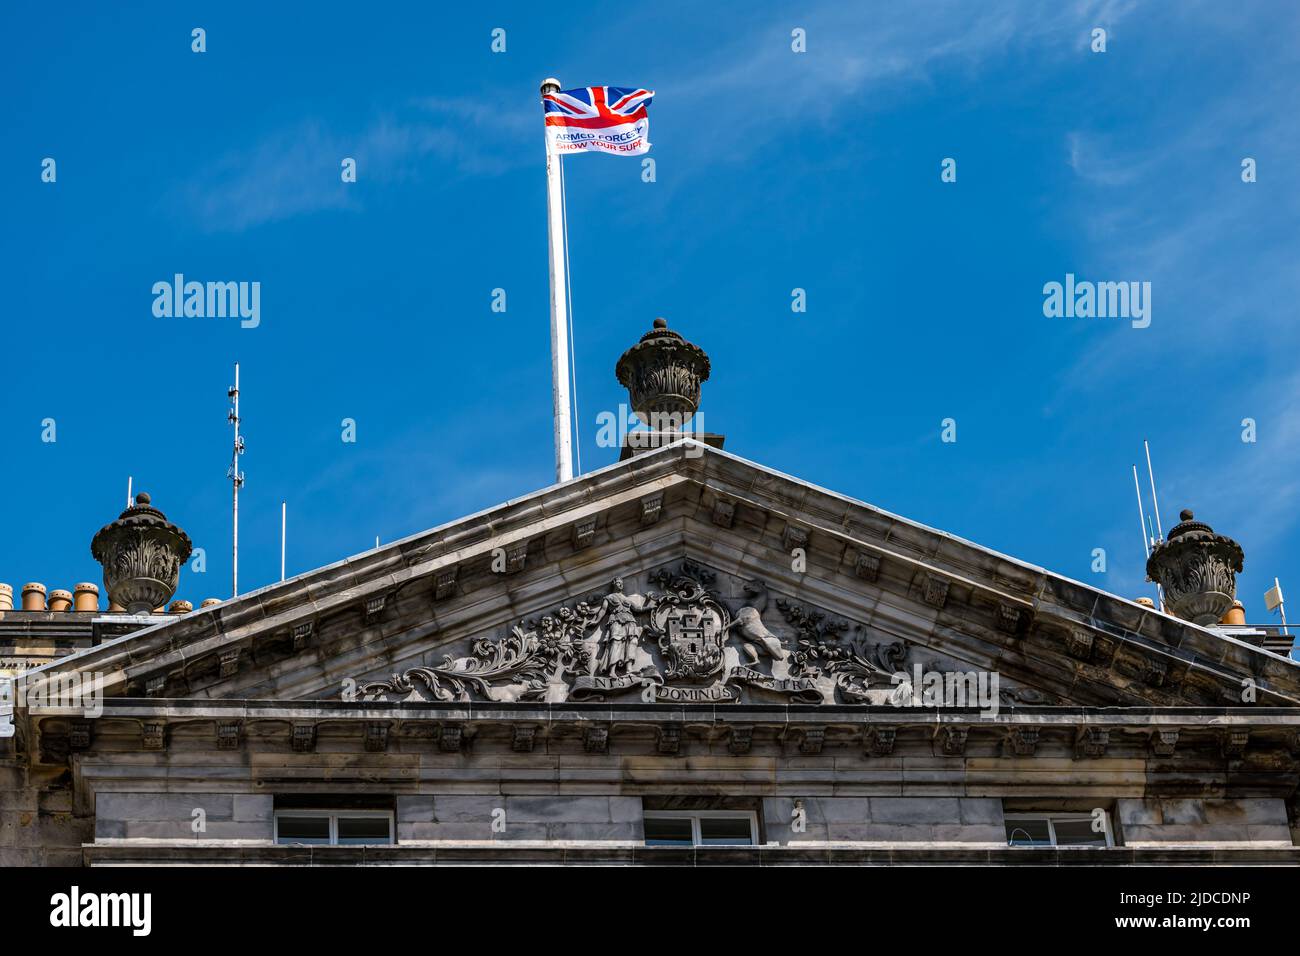 City Chambers, Edinburgh, Scotland, United Kingdom, 20 June 2022. Armed Forces flag raising ceremony: A procession with Armed Forces Day flag. The Flag Raising Ceremony is a national event to honour Armed Forces personnel. Pictured: the flag is raised above City Chambers Stock Photo